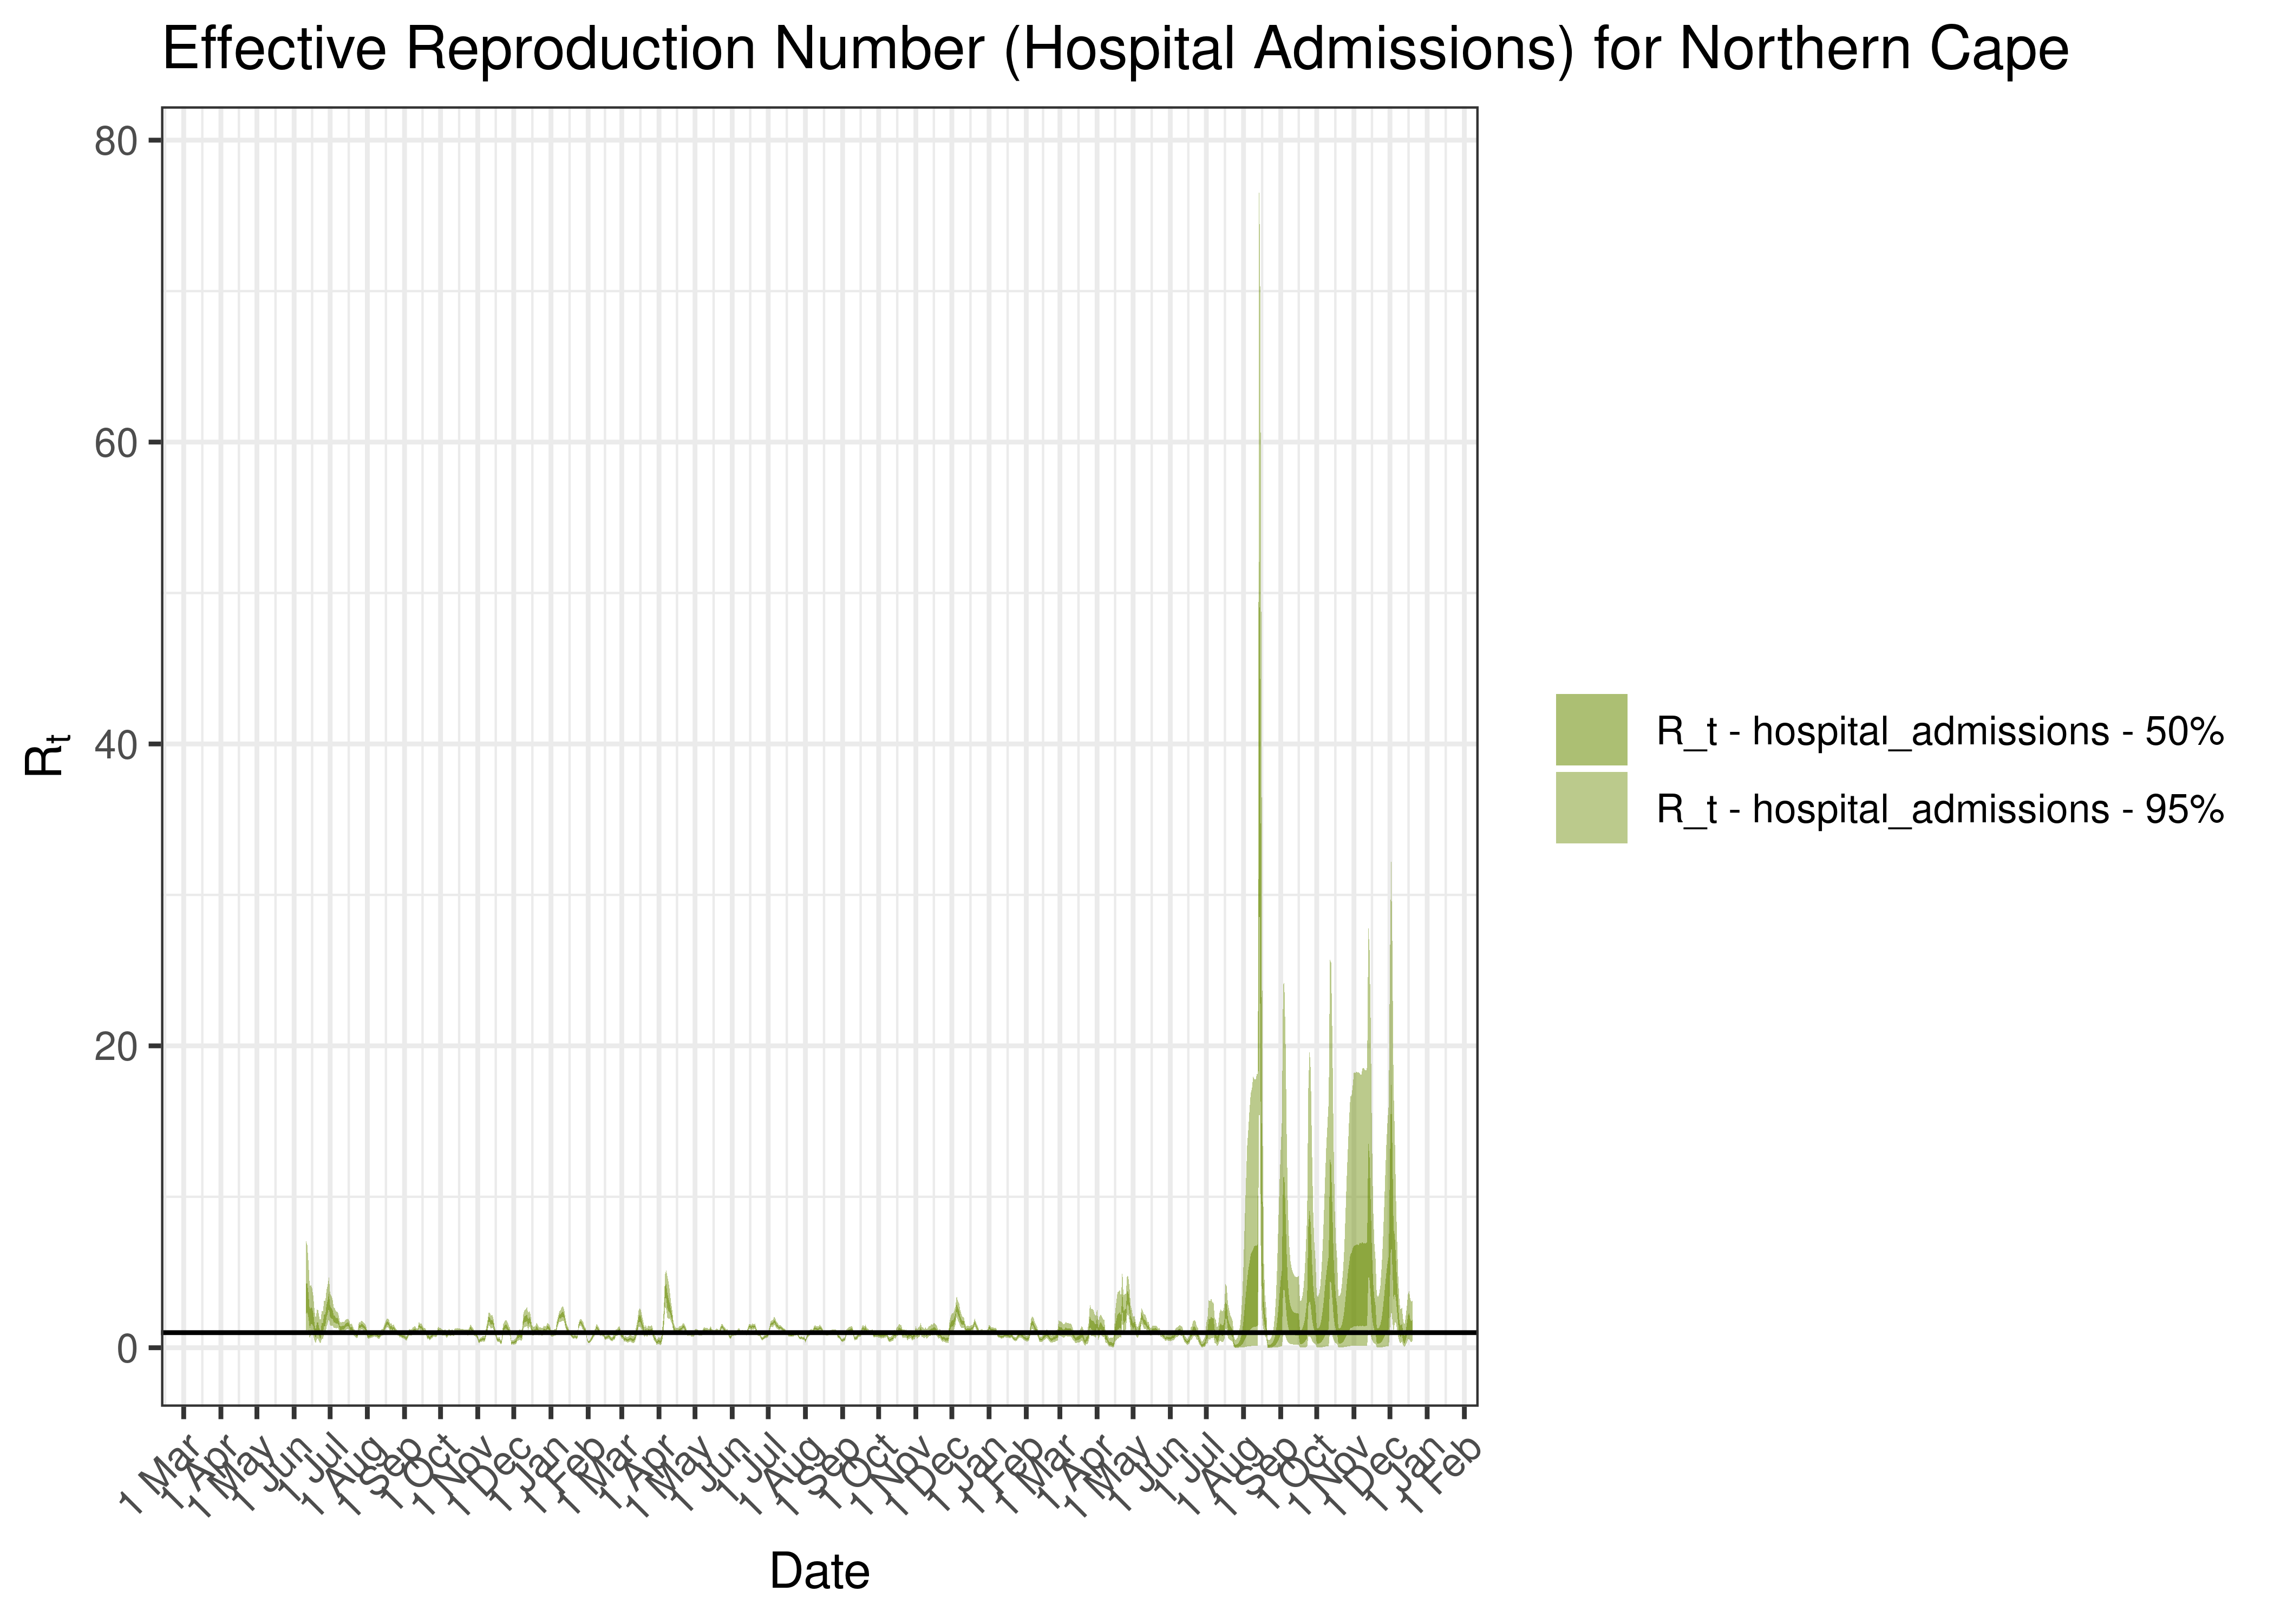 Estimated Effective Reproduction Number Based on Hospital Admissions for Northern Cape since 1 April 2020